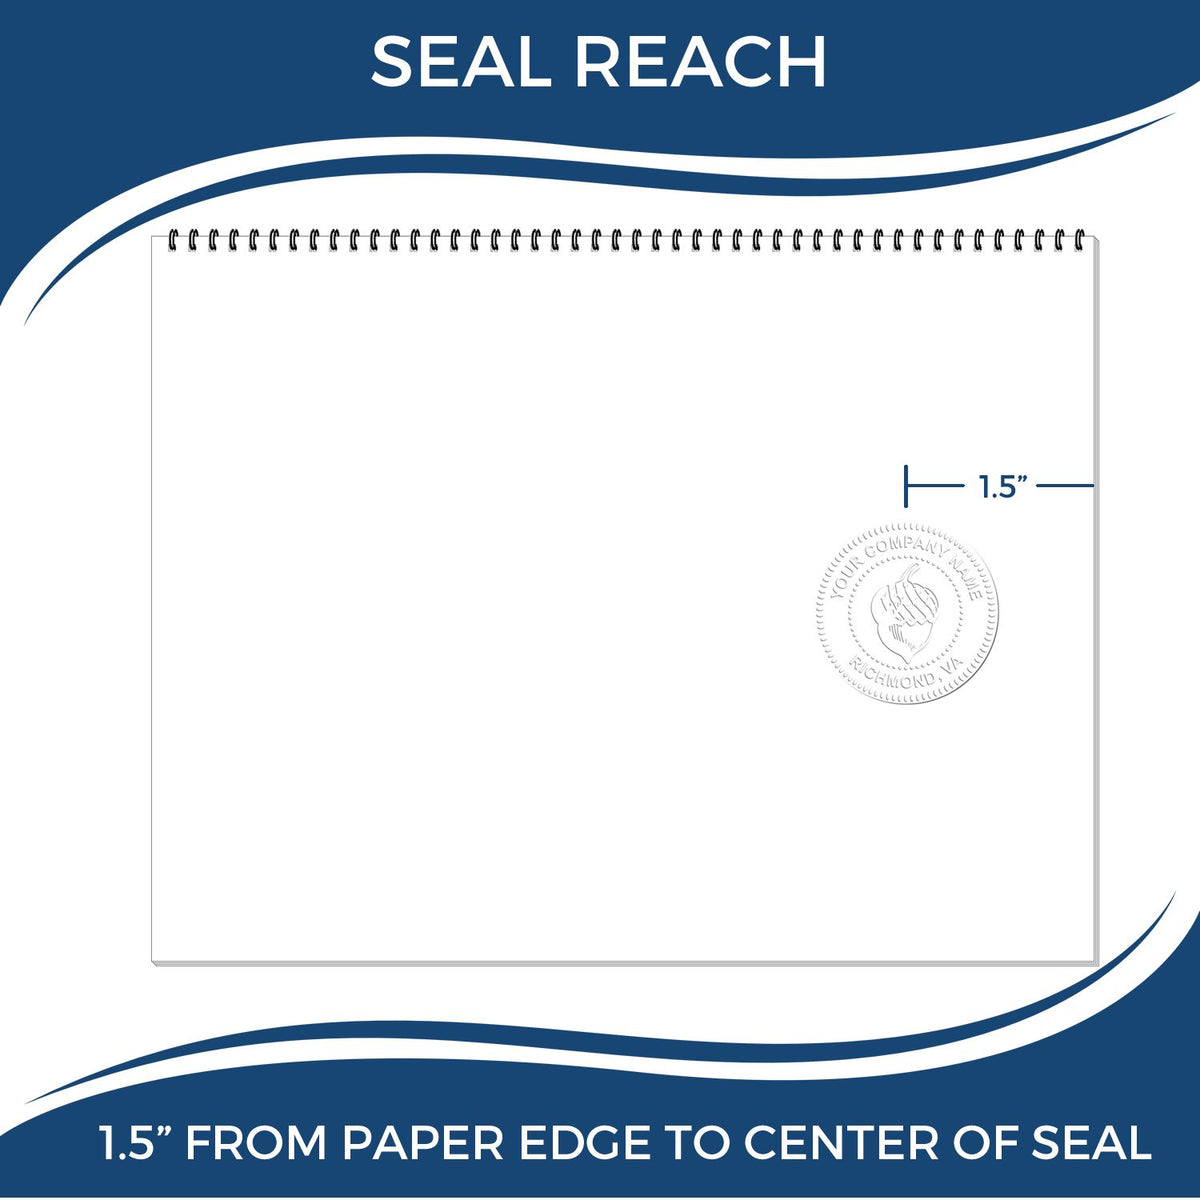 An infographic showing the seal reach which is represented by a ruler and a miniature seal image of the New York Geologist Desk Seal